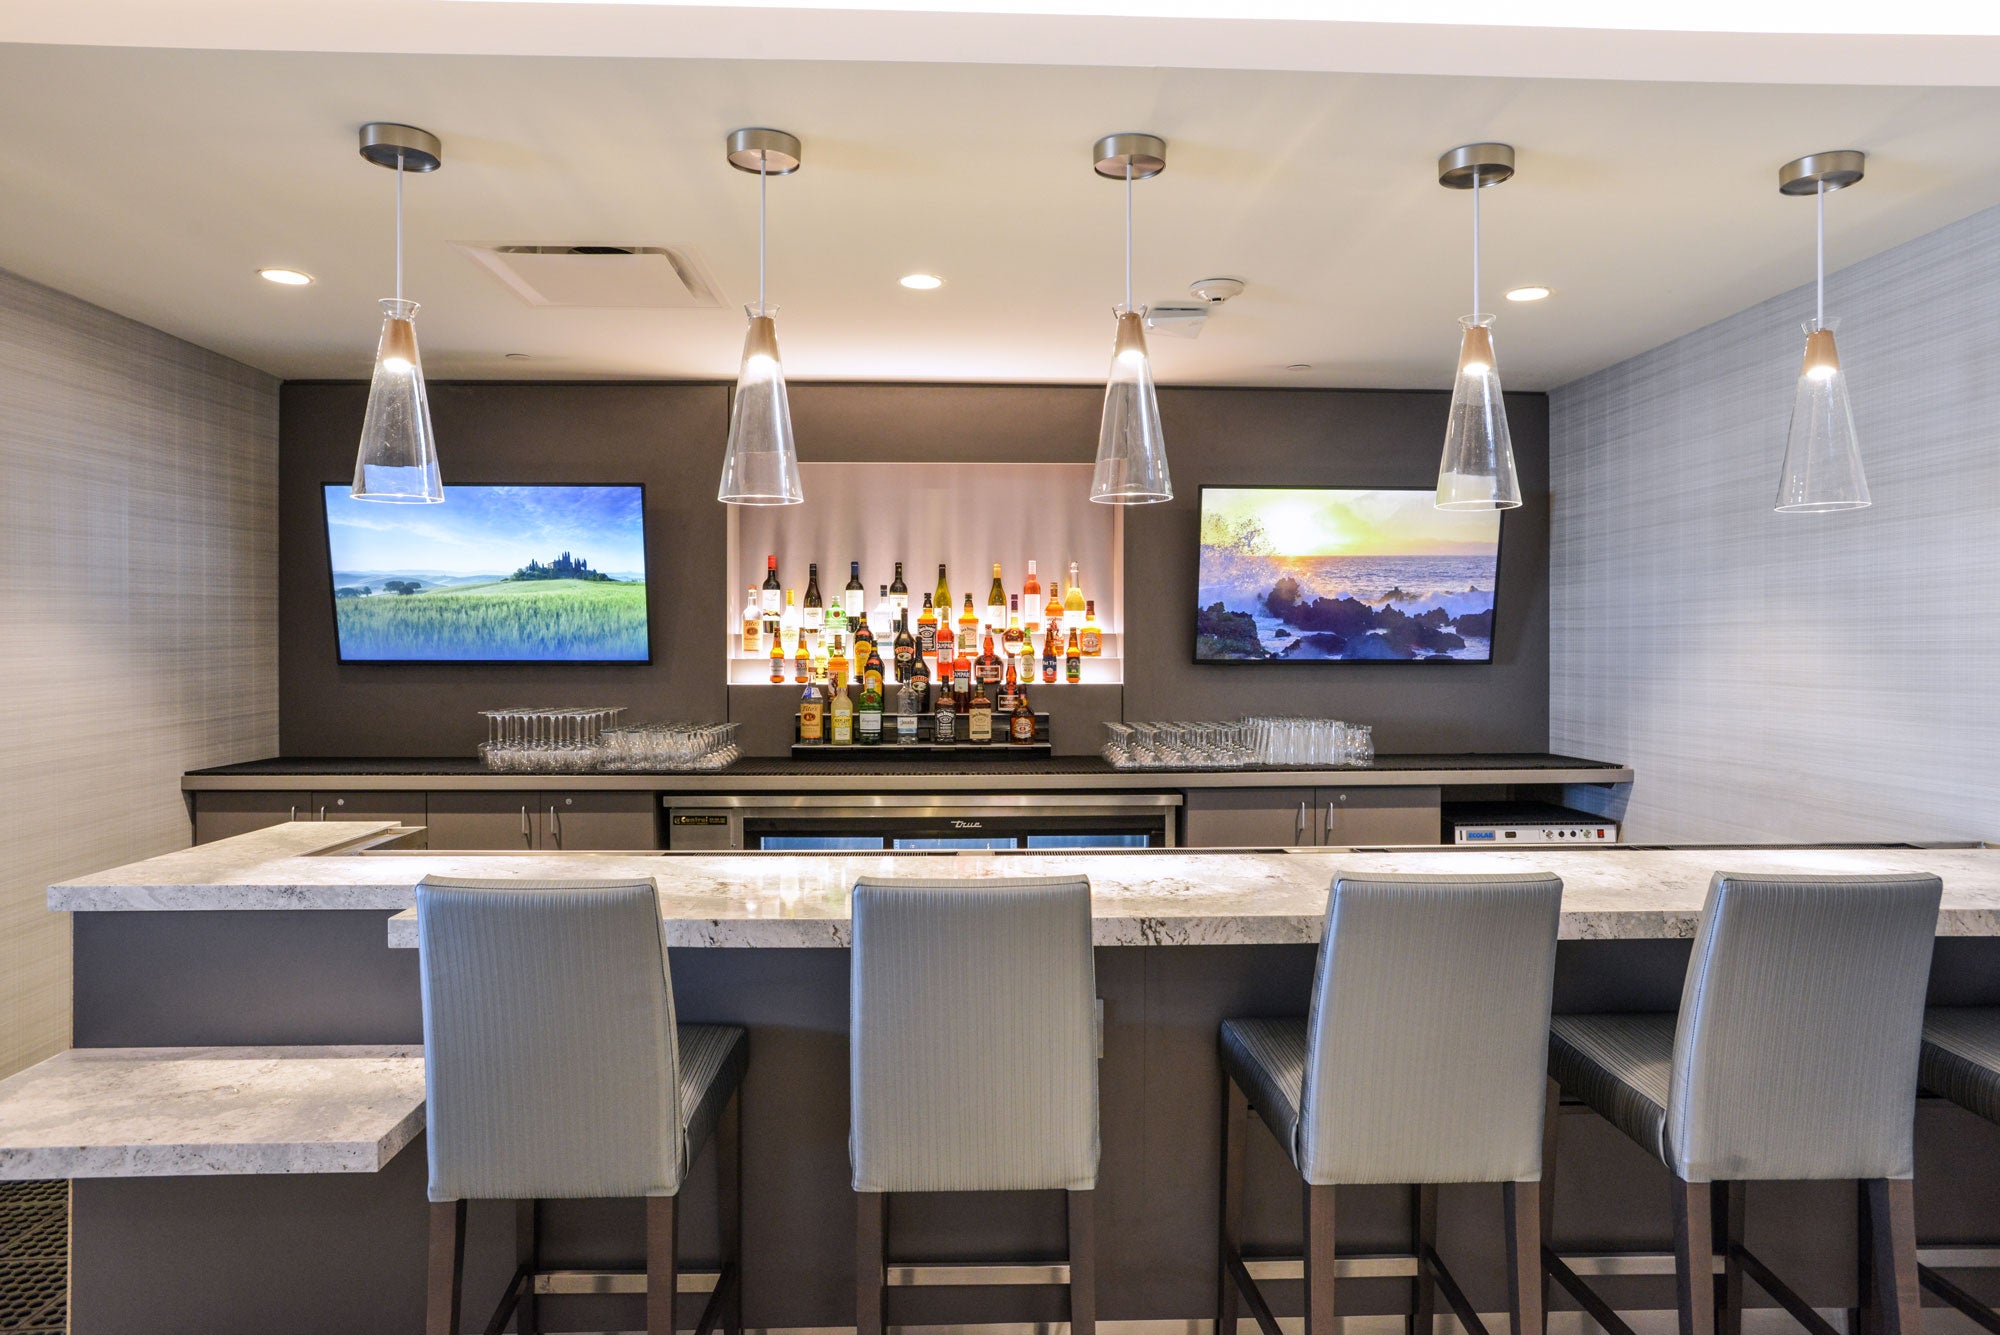 blaas gat Schrijfmachine Kaal The Club, Pittsburgh, Concourse C – The Club Airport Lounges